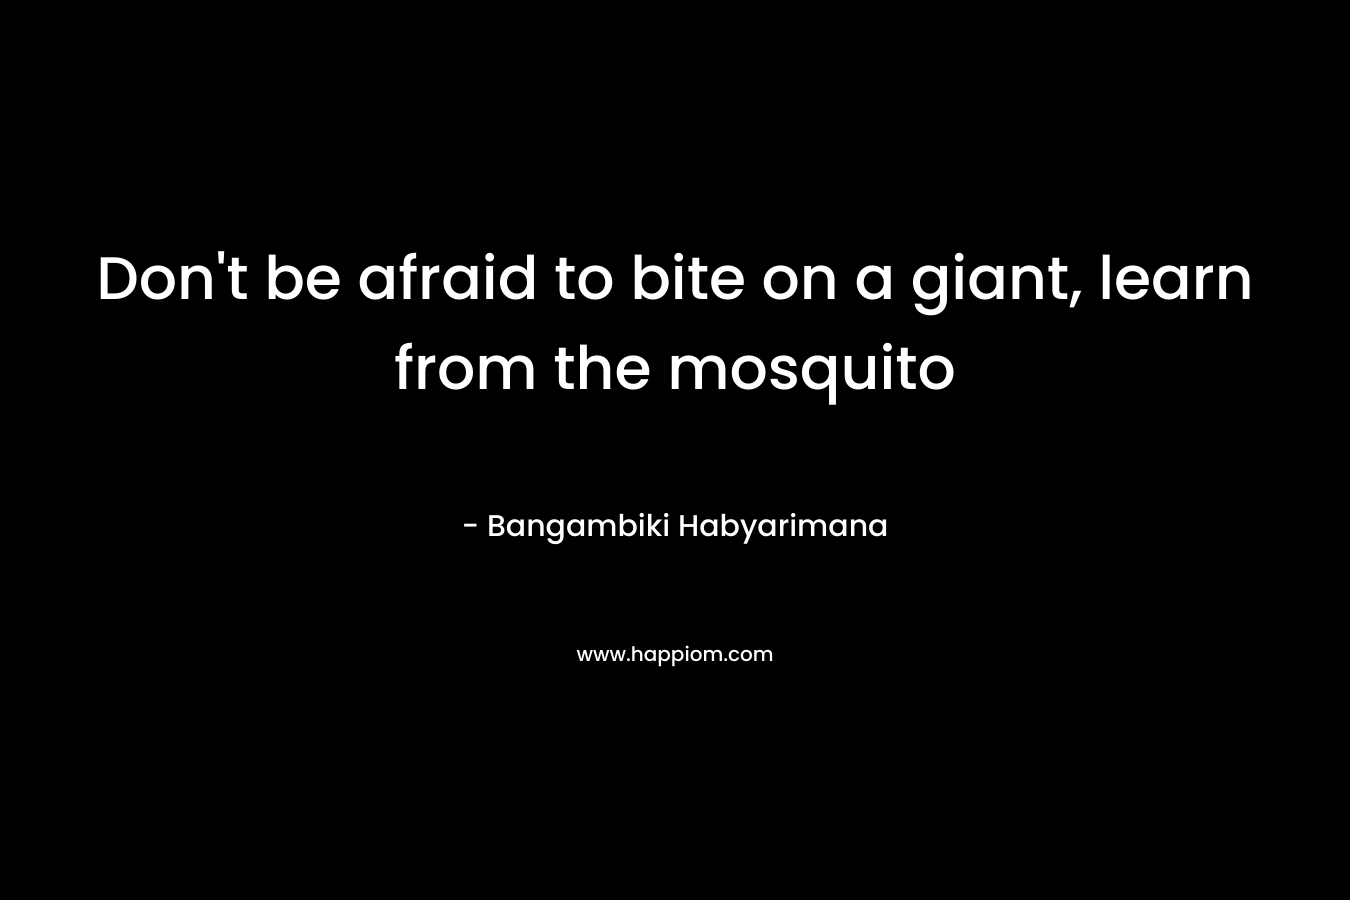 Don’t be afraid to bite on a giant, learn from the mosquito – Bangambiki Habyarimana